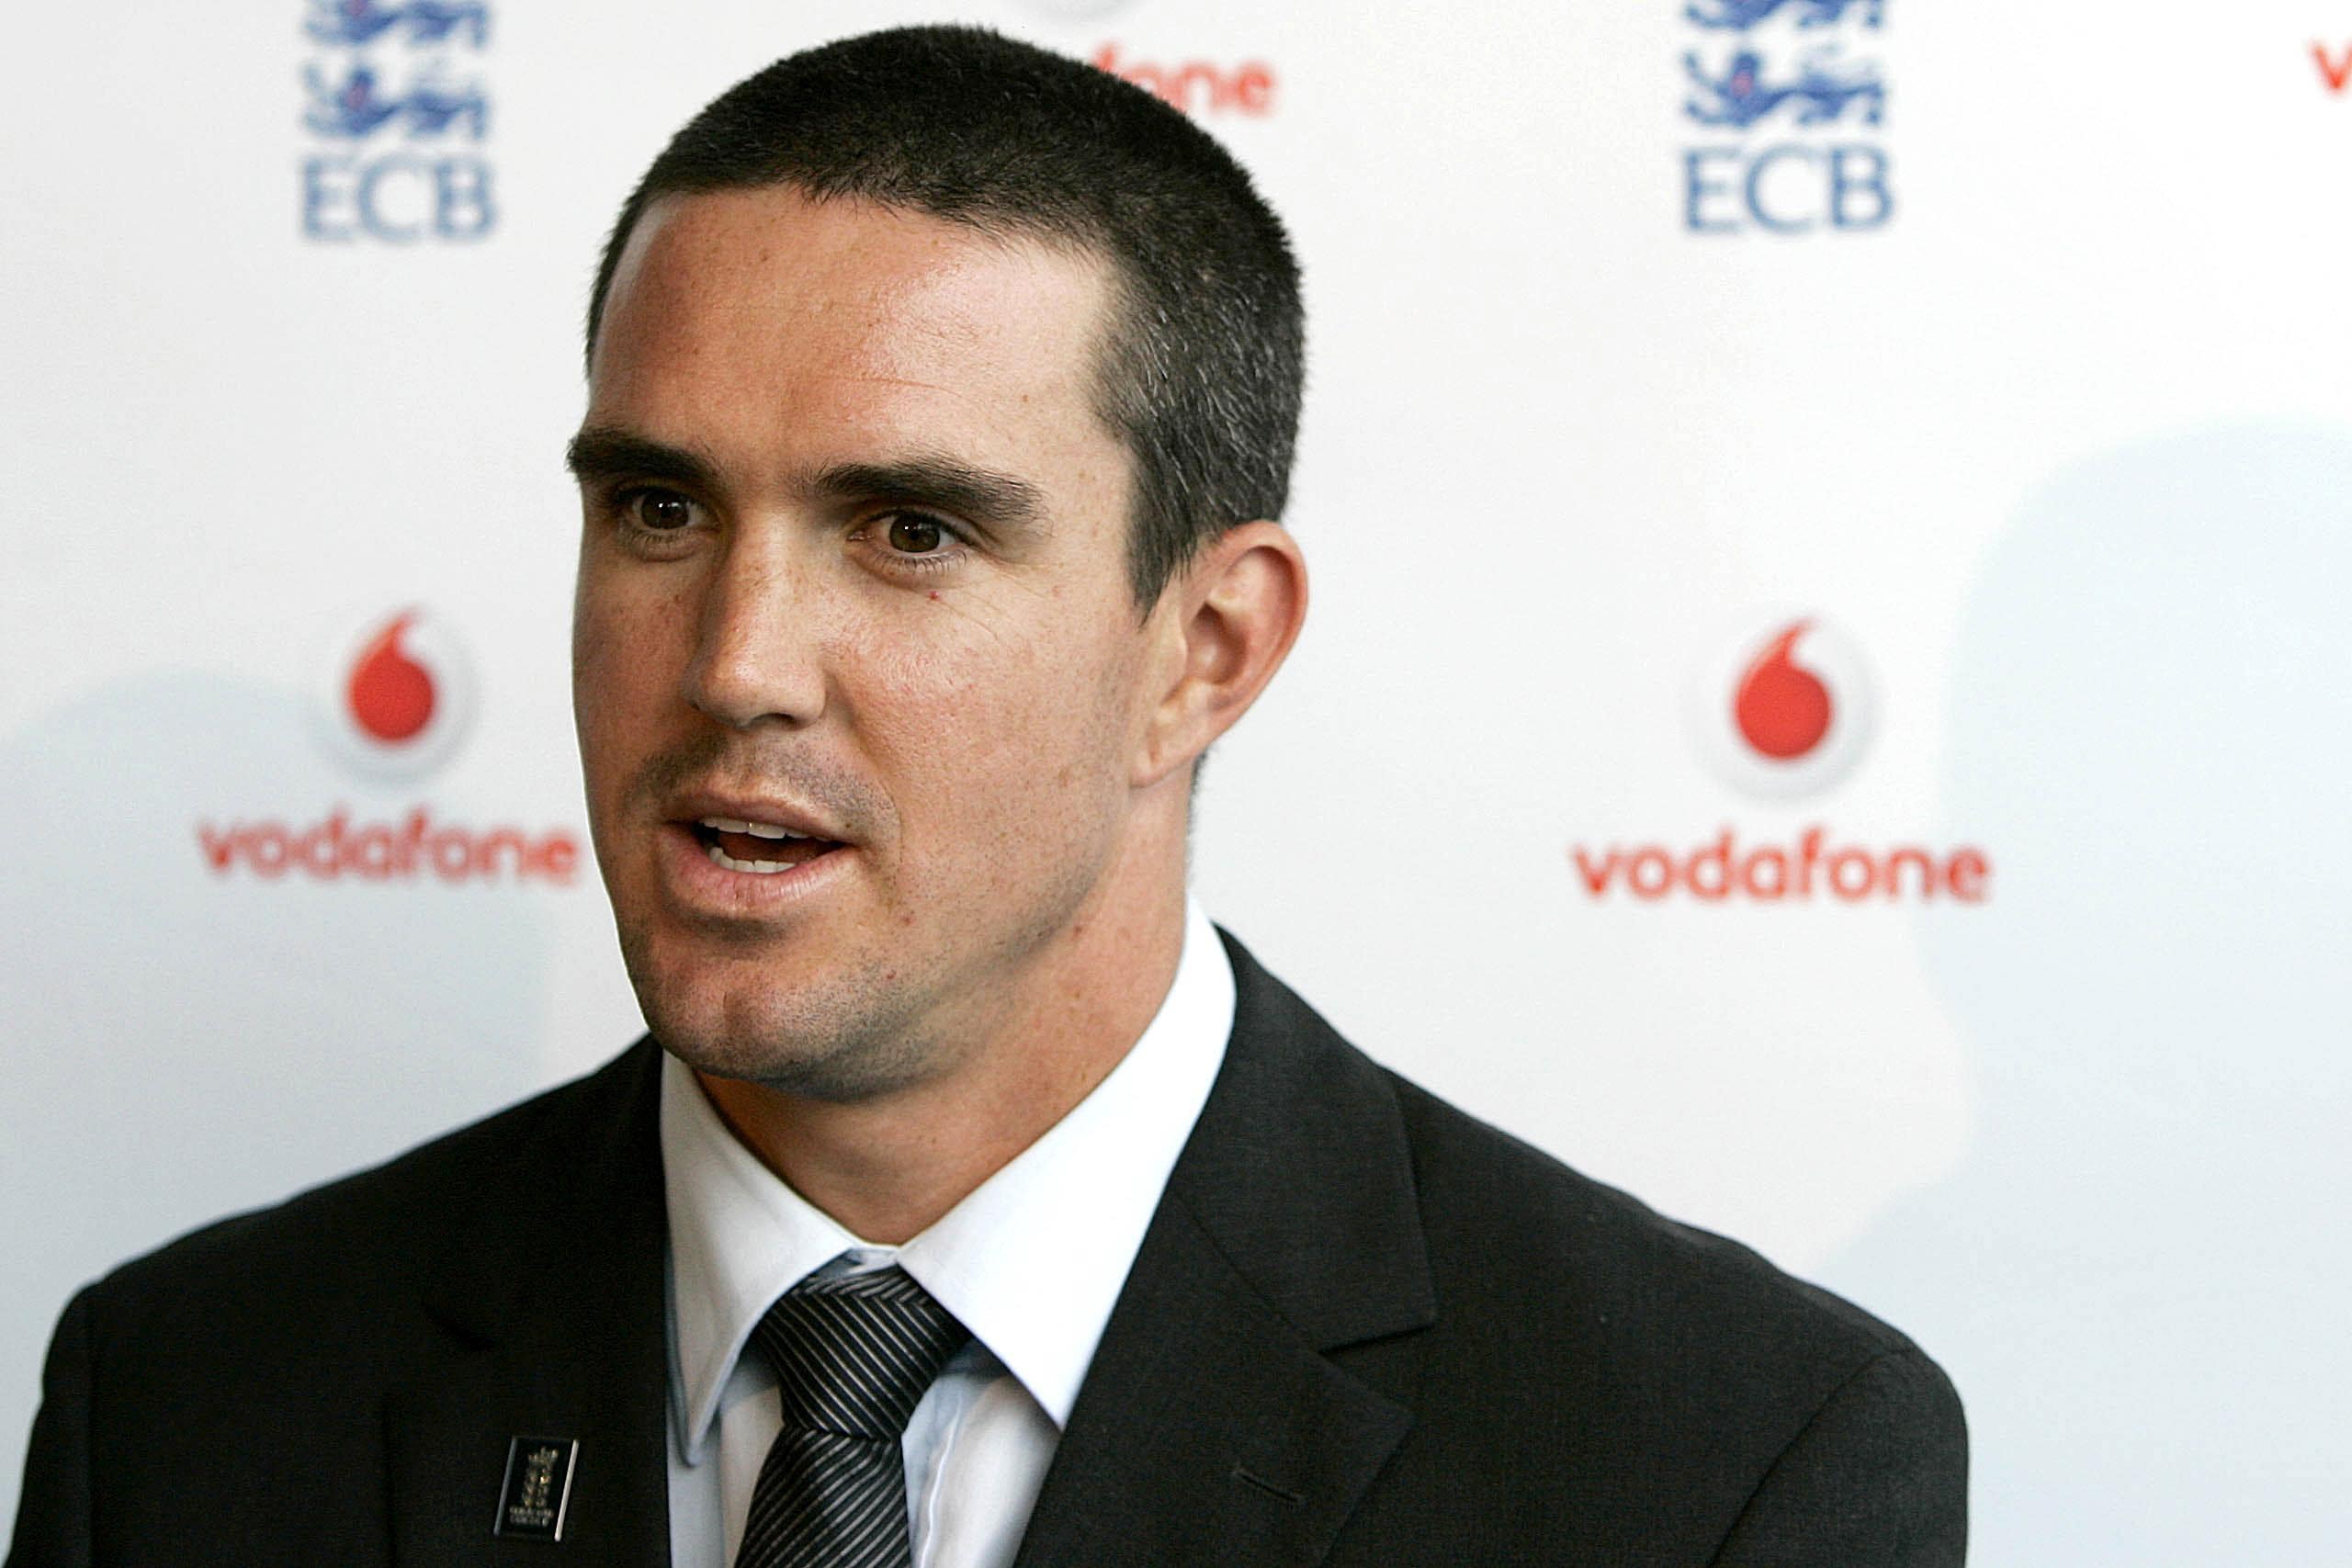 Kevin Pietersen became England’s Test and one-day captain in 2008 (Carl Court/PA)